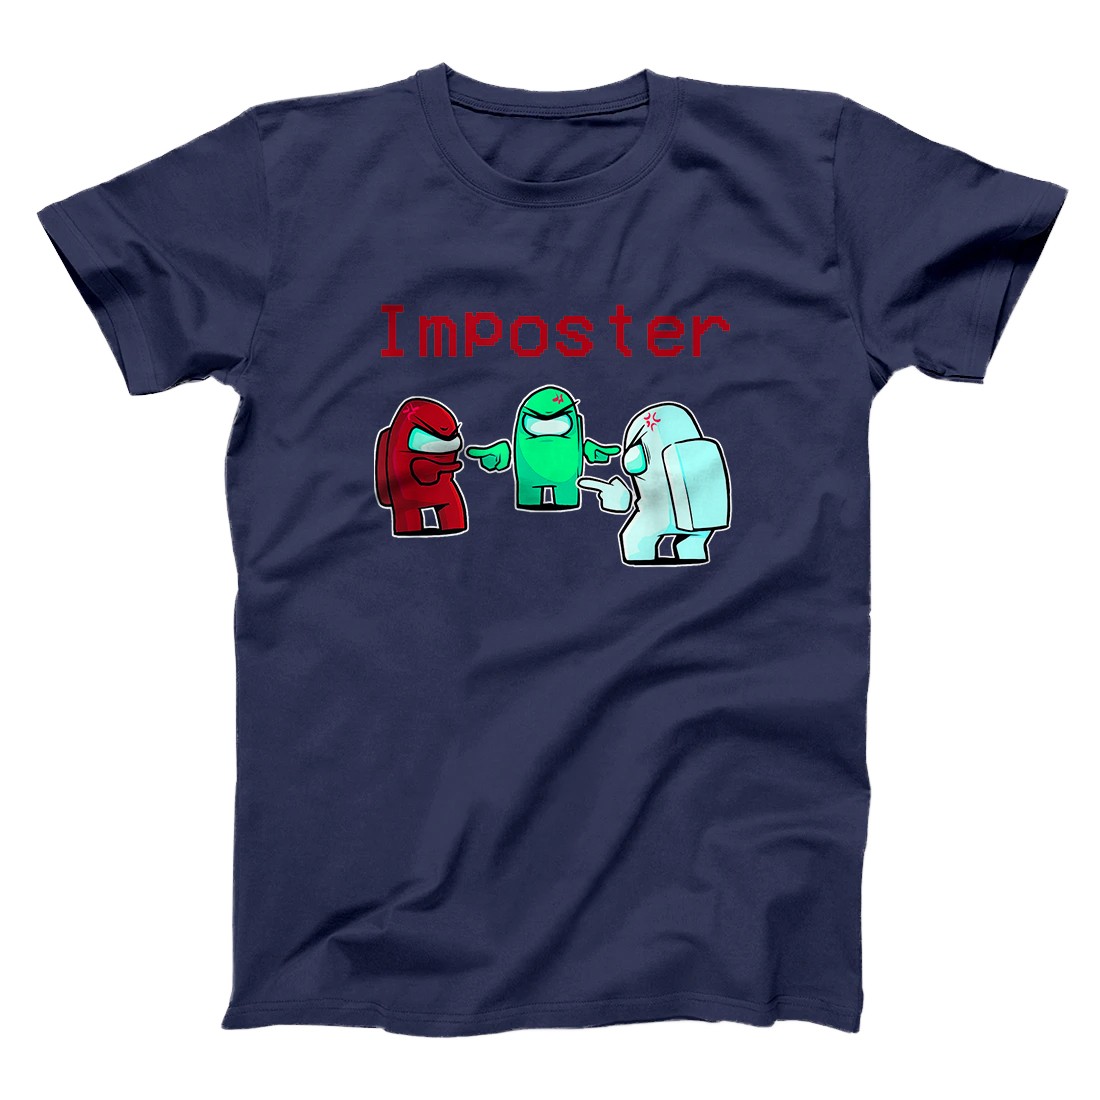 Imposter Among Game Us Sus T-Shirt for kids T-Shirt - All Star Shirt